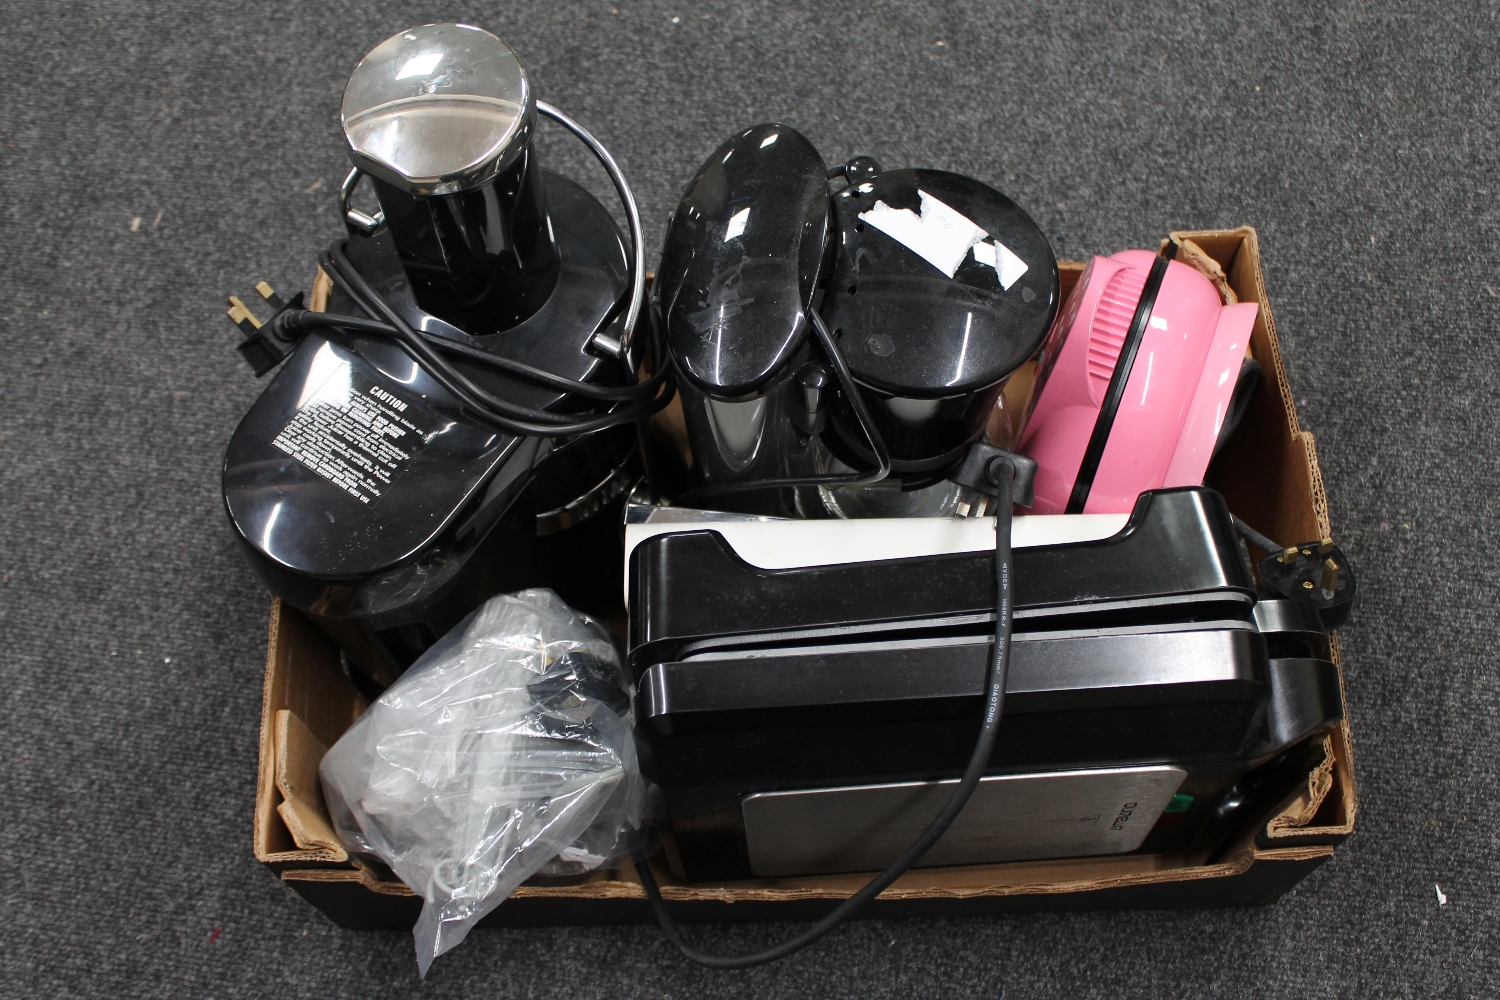 A box of kitchen electricals, juicer, coffee maker,